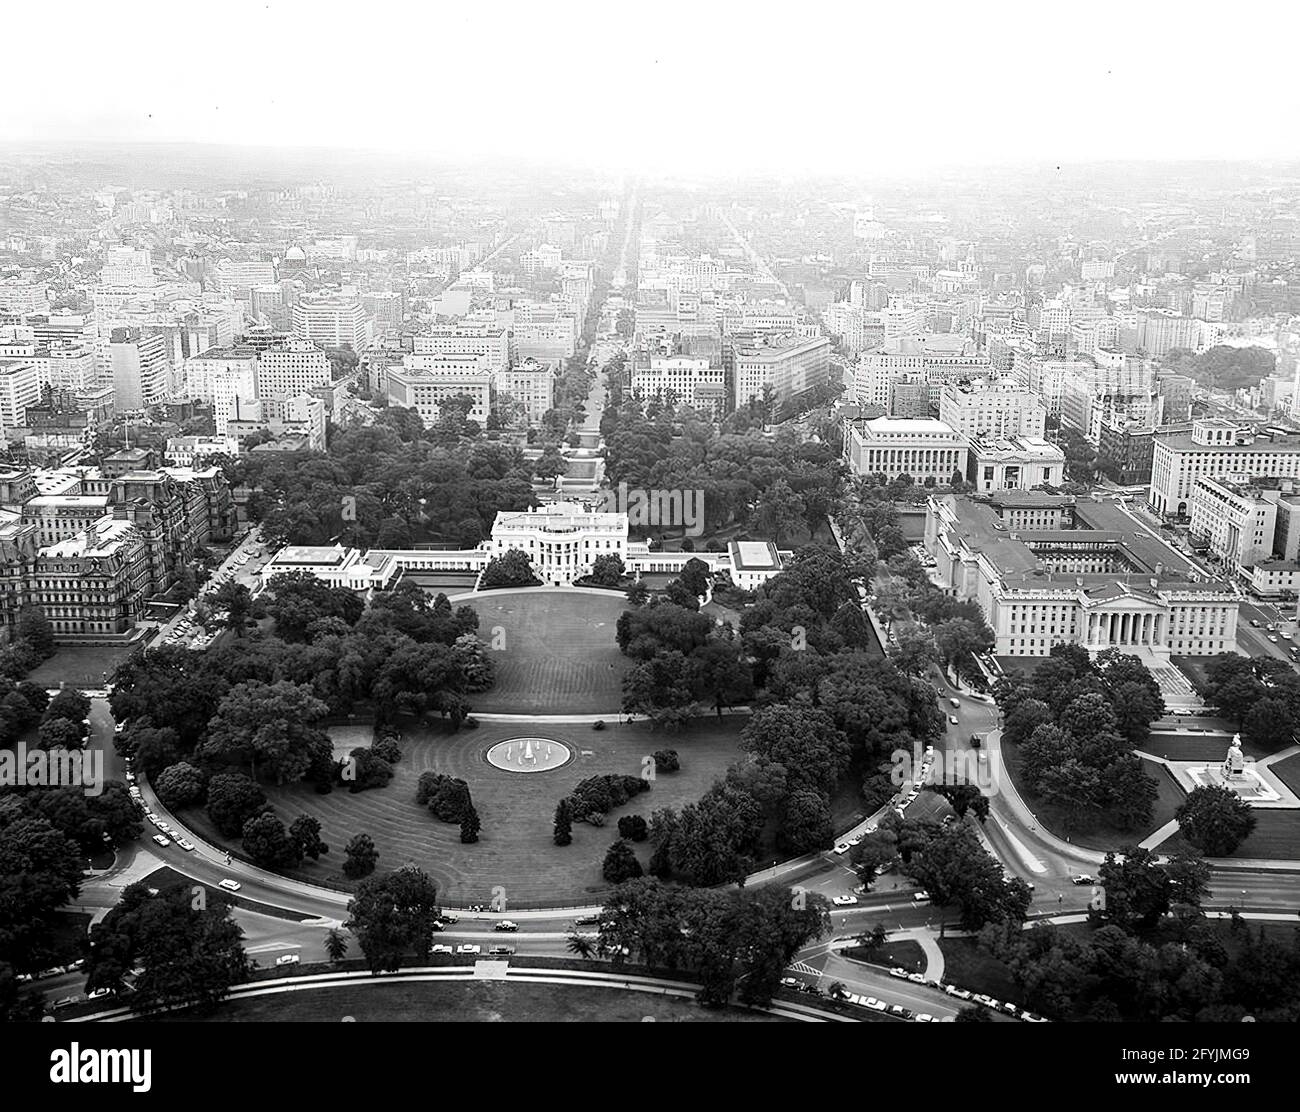 Aerial photo of Washington, D.C. and the North Front and South Rear of the White House taken from Lafayette Park in President's Park. Also included in the photograph are the Ellipse, Washington Monument, Jefferson Memorial, Executive Office Building, and the United States Department of the Treasury building. Stock Photo